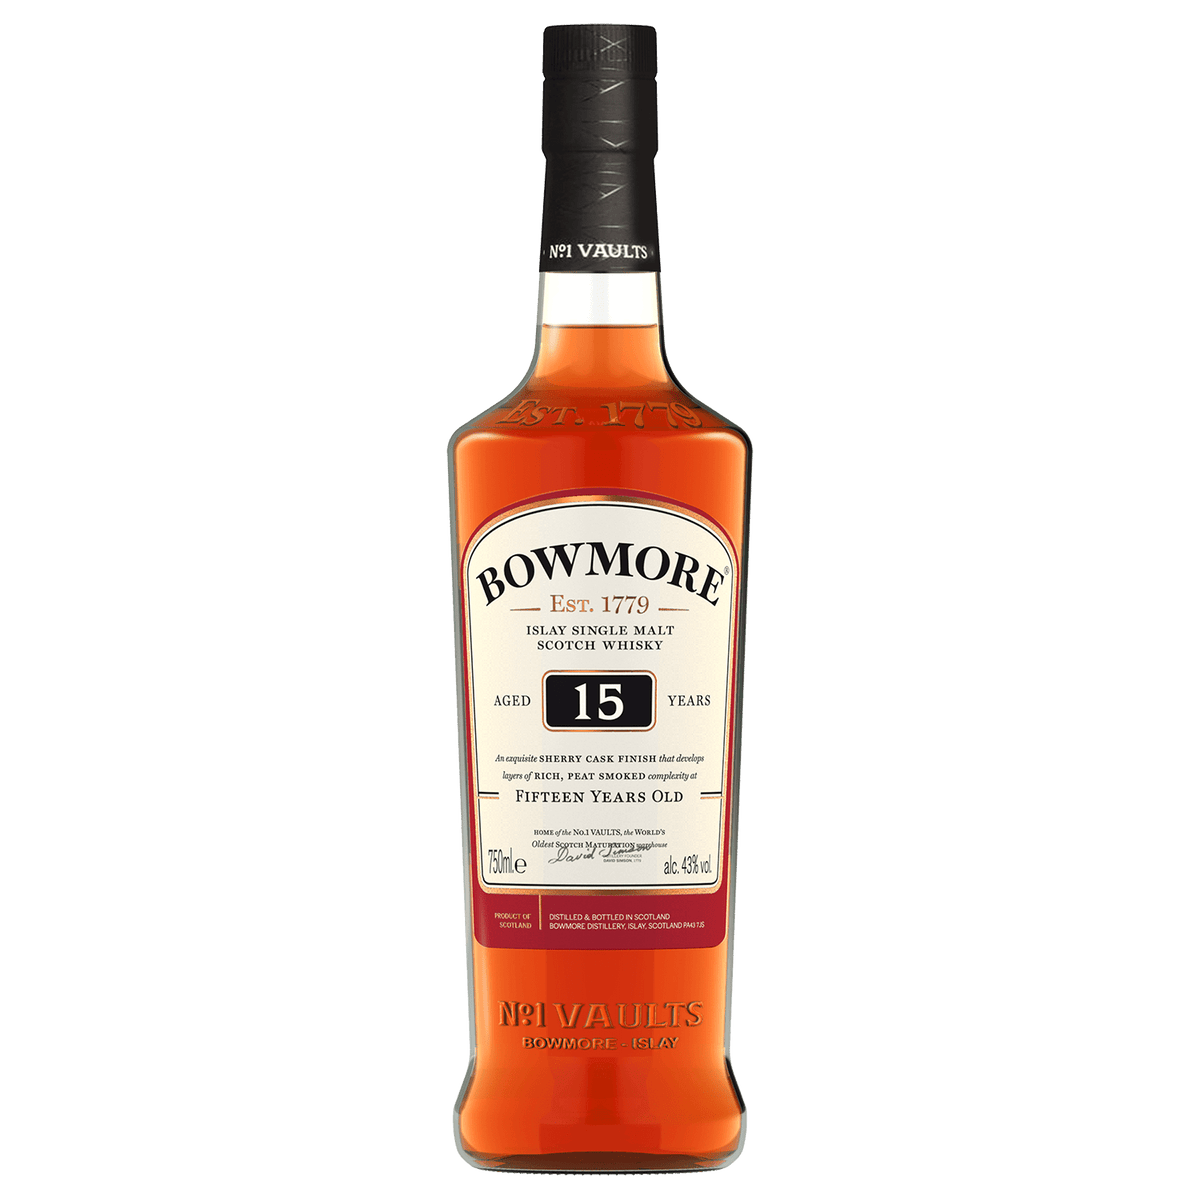 Bowmore 15 Year Old Scotch Whisky - Barbank